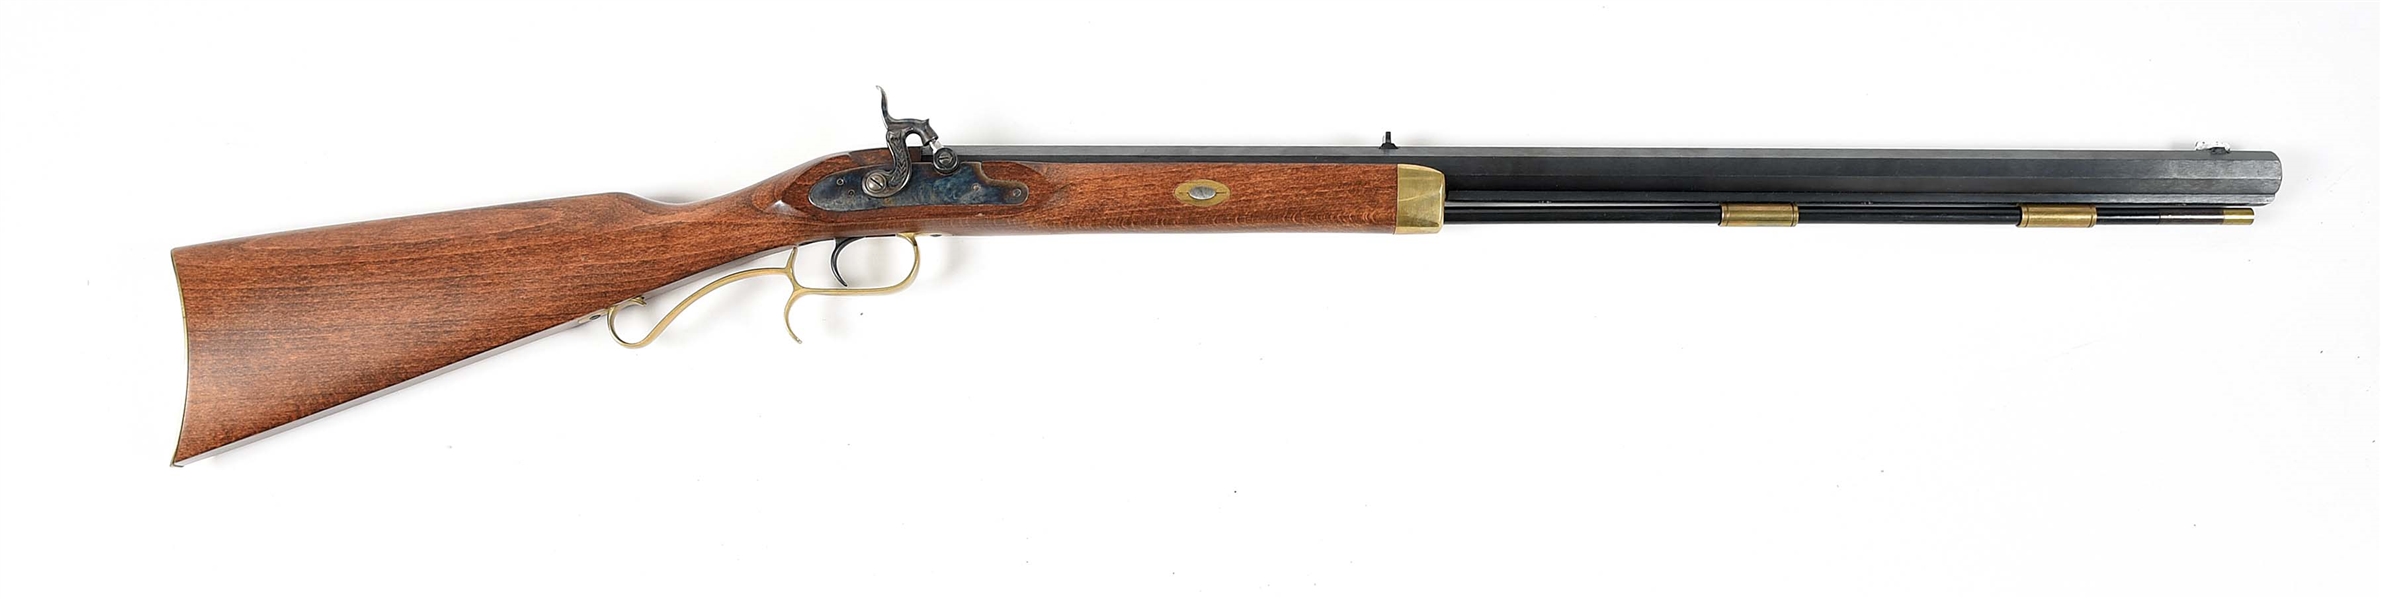 (A) TRADITIONS SPRINGFIELD HAWKEN PERCUSSION RIFLE.